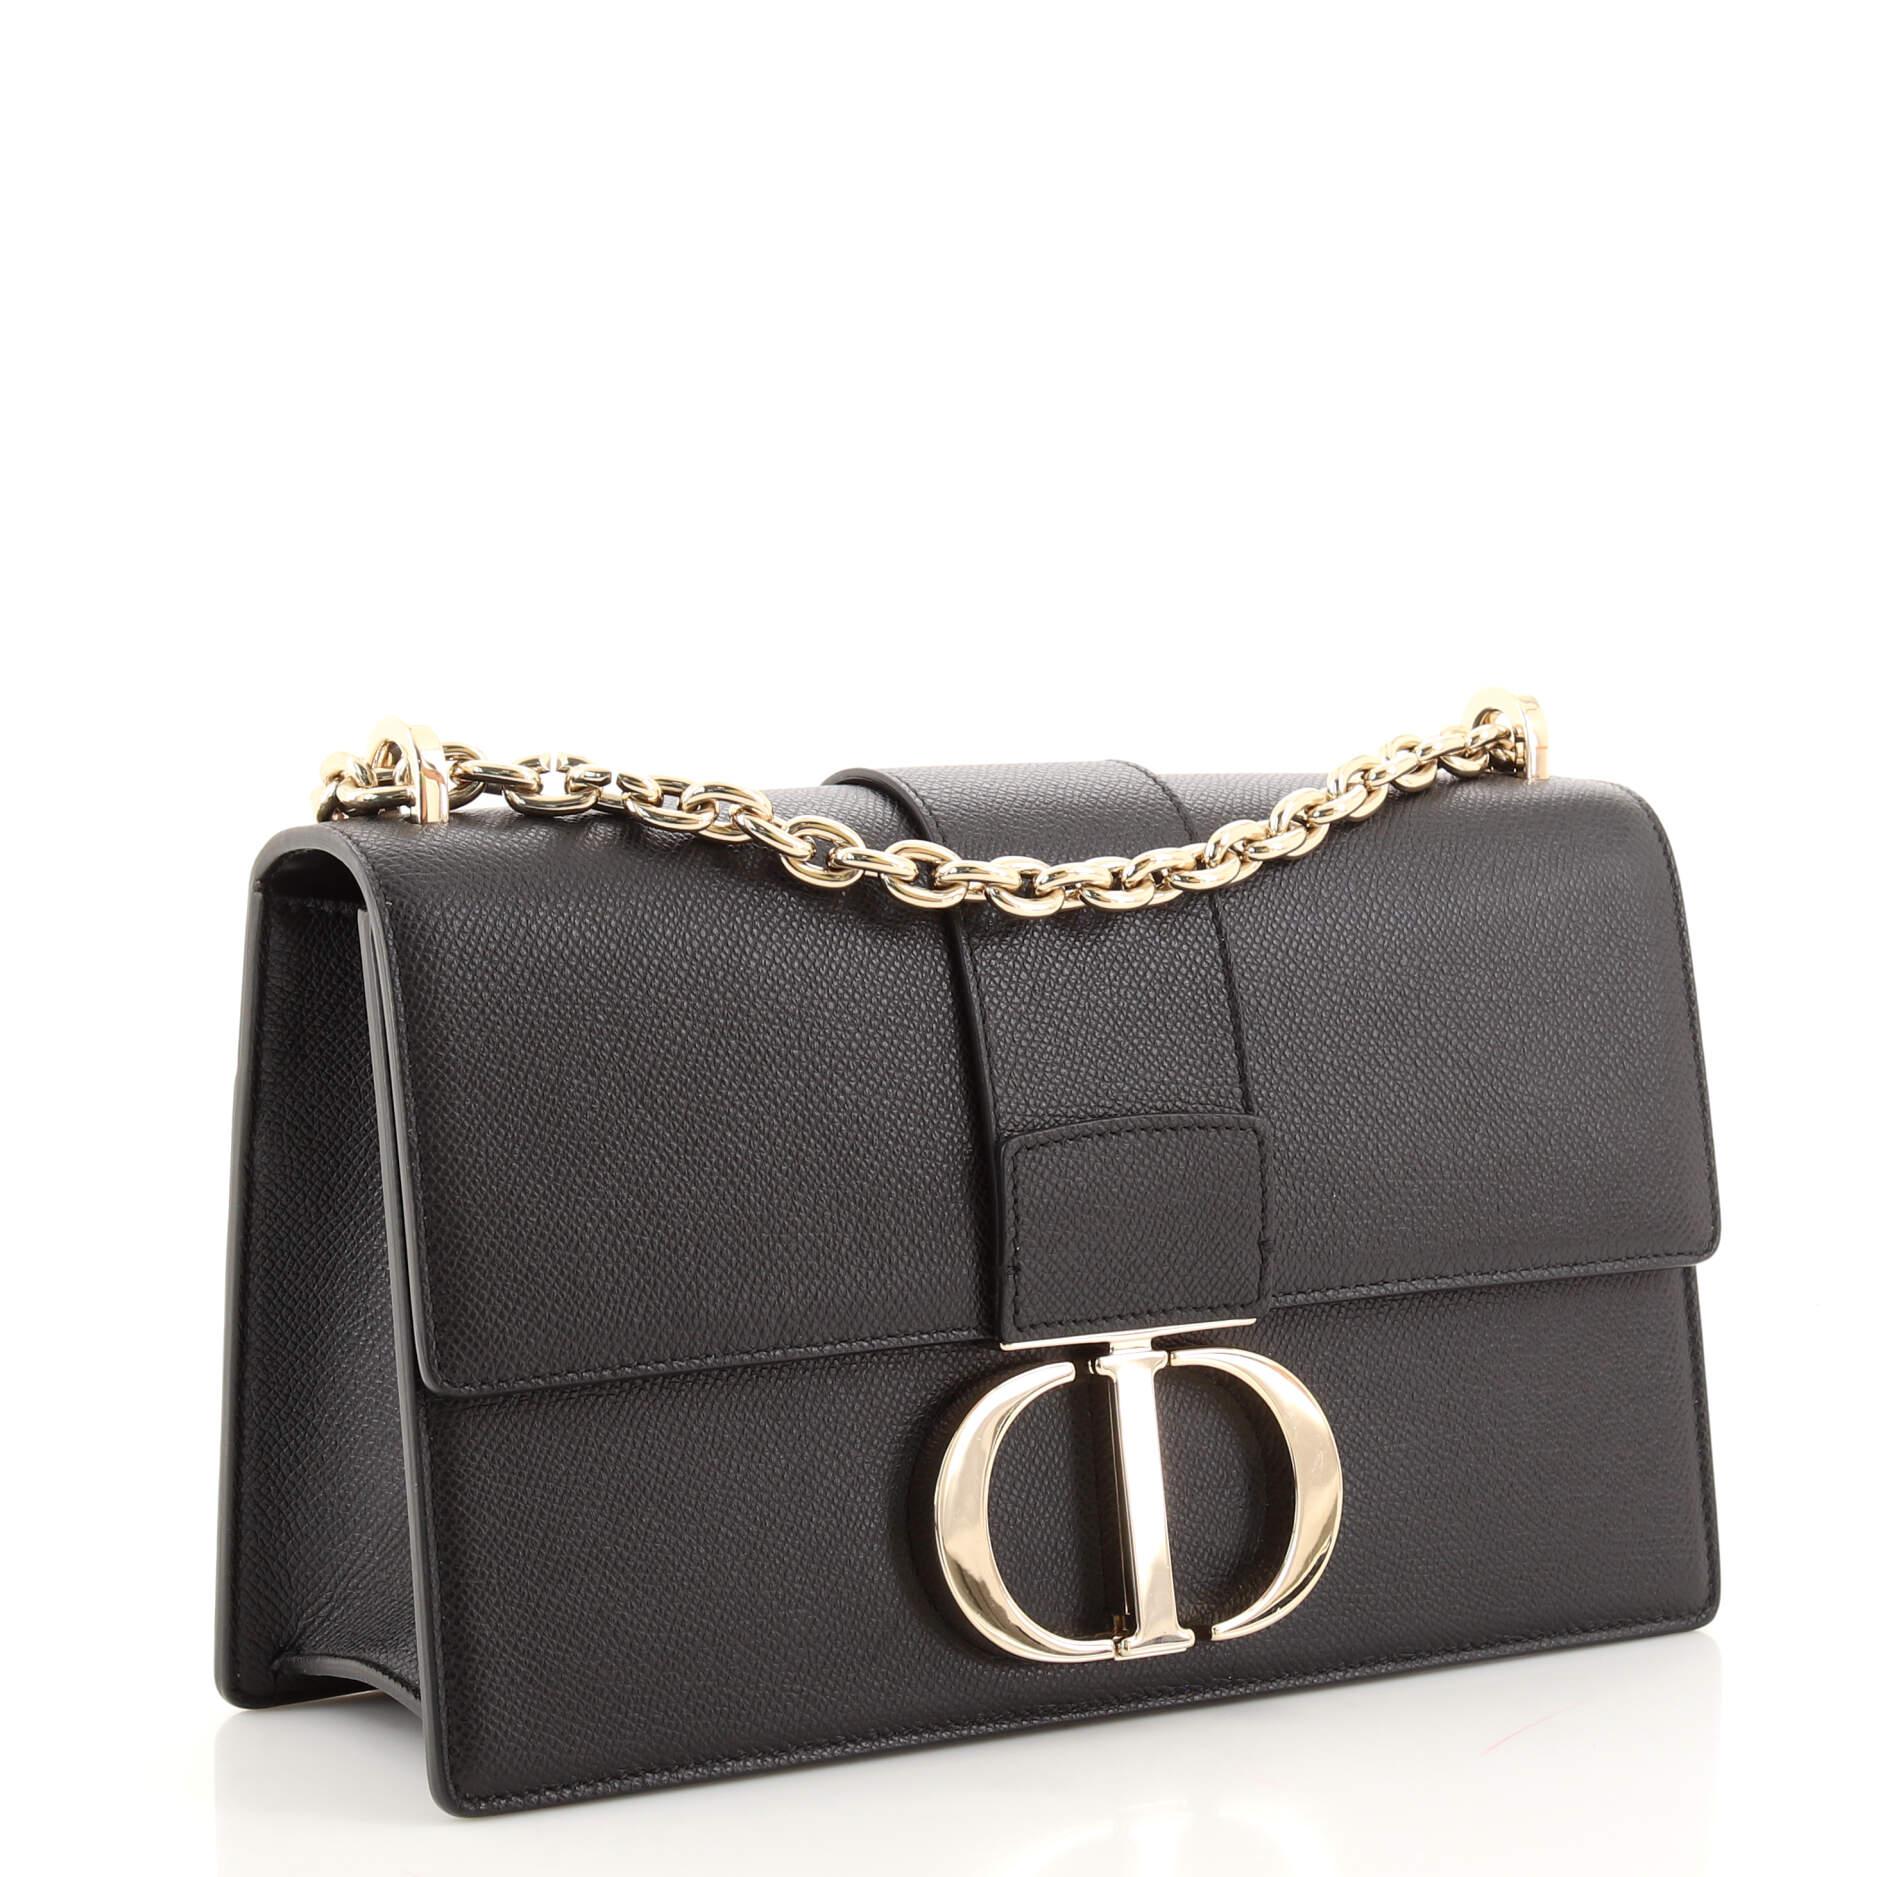 30 montaigne chain bag with handle